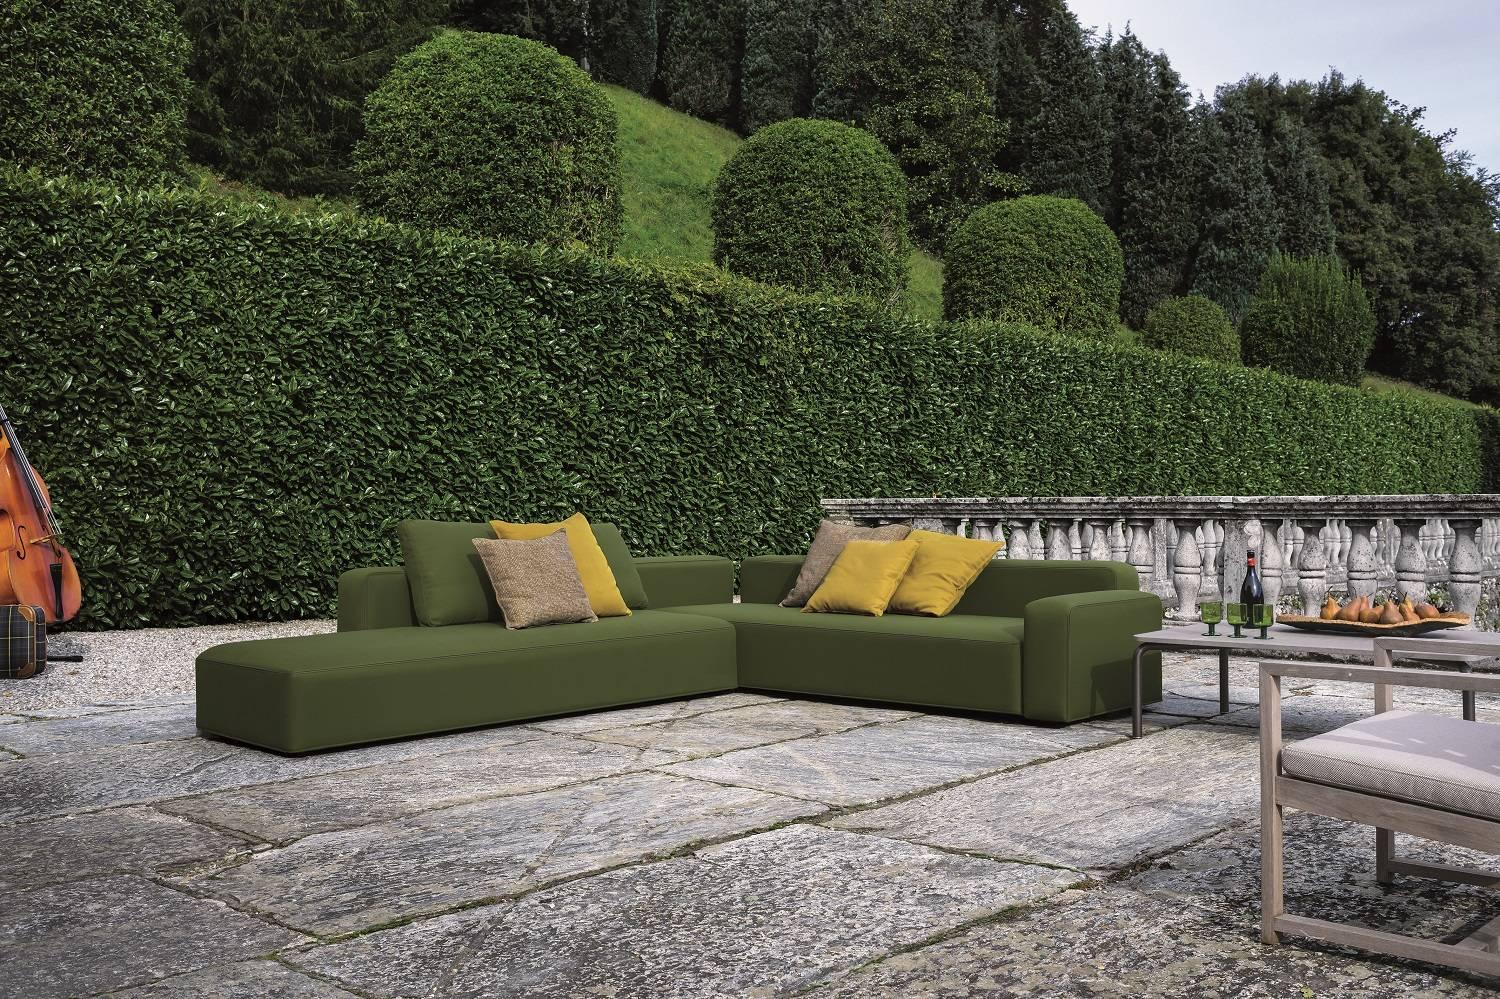 Overview:
Dandy is the new revolutionary outdoor system by Roda, which includes all the functions of a textile sofa for indoor use, so intimate and familiar, in a completely new proposal for outdoor. Designed by the unmistakable talent of Rodolfo